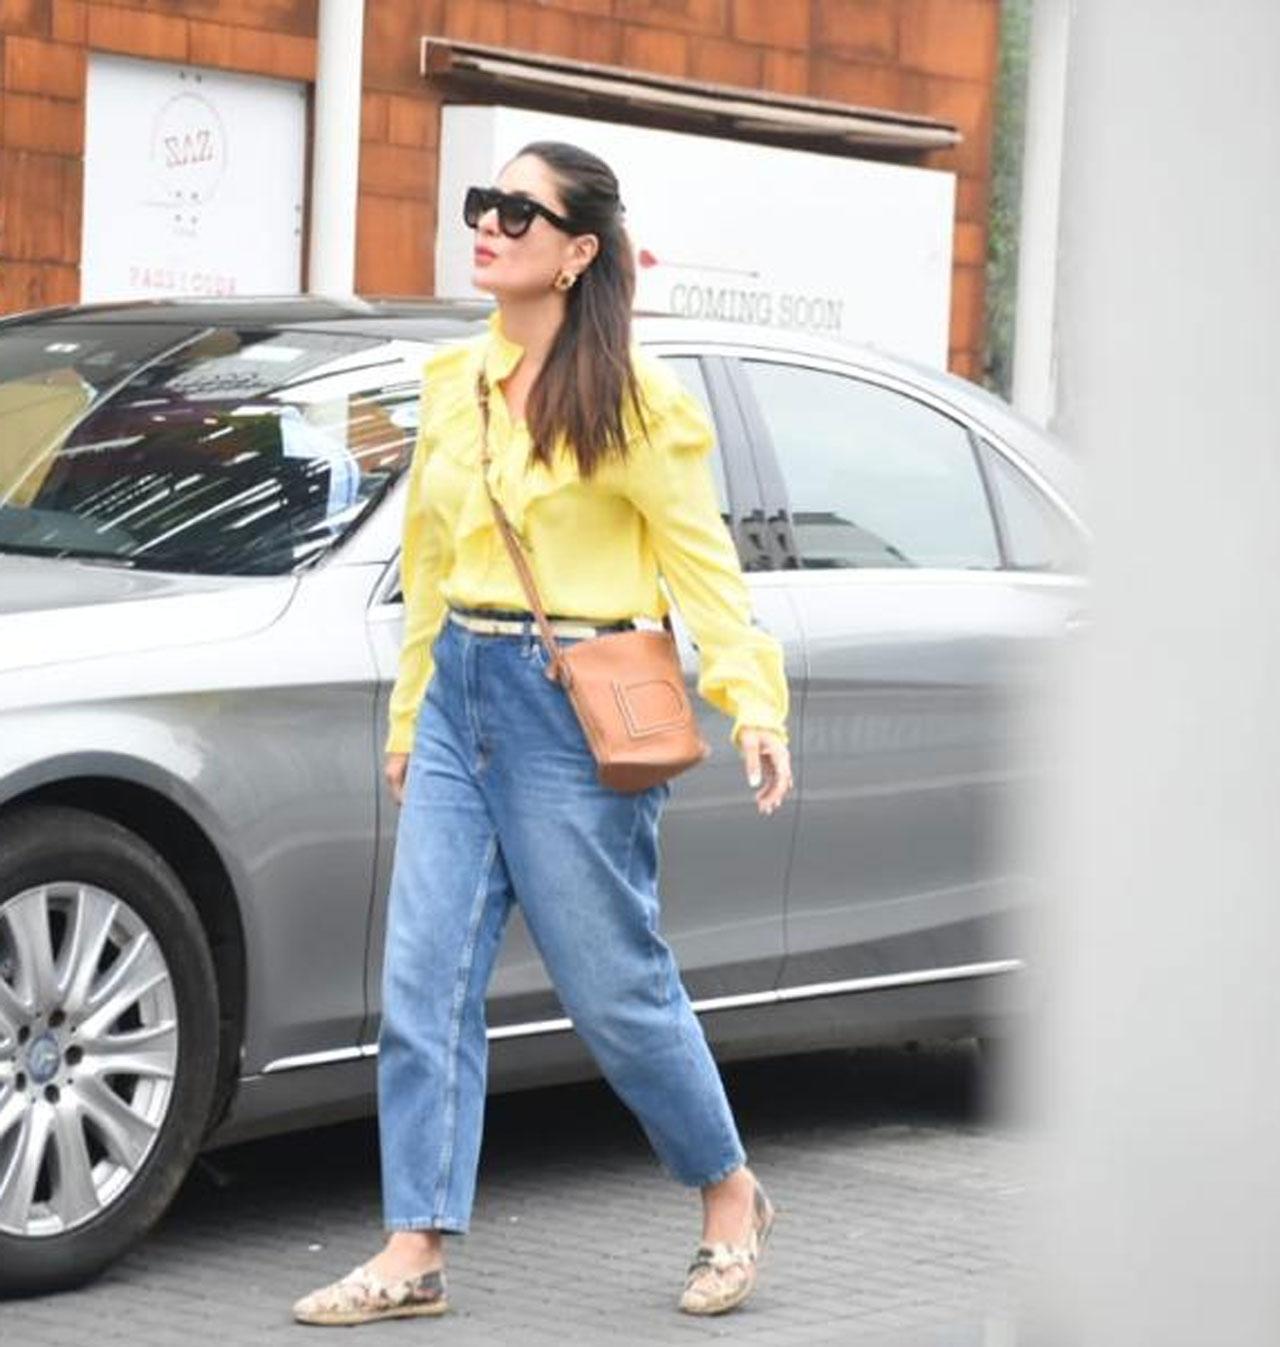 Kareena Kapoor Khan was recently spotted at Bandra Kurla Complex in the city at a toy store. The actress opted for a bright yellow shirt, a pair of blue jeans and shades to complete her look for the day.